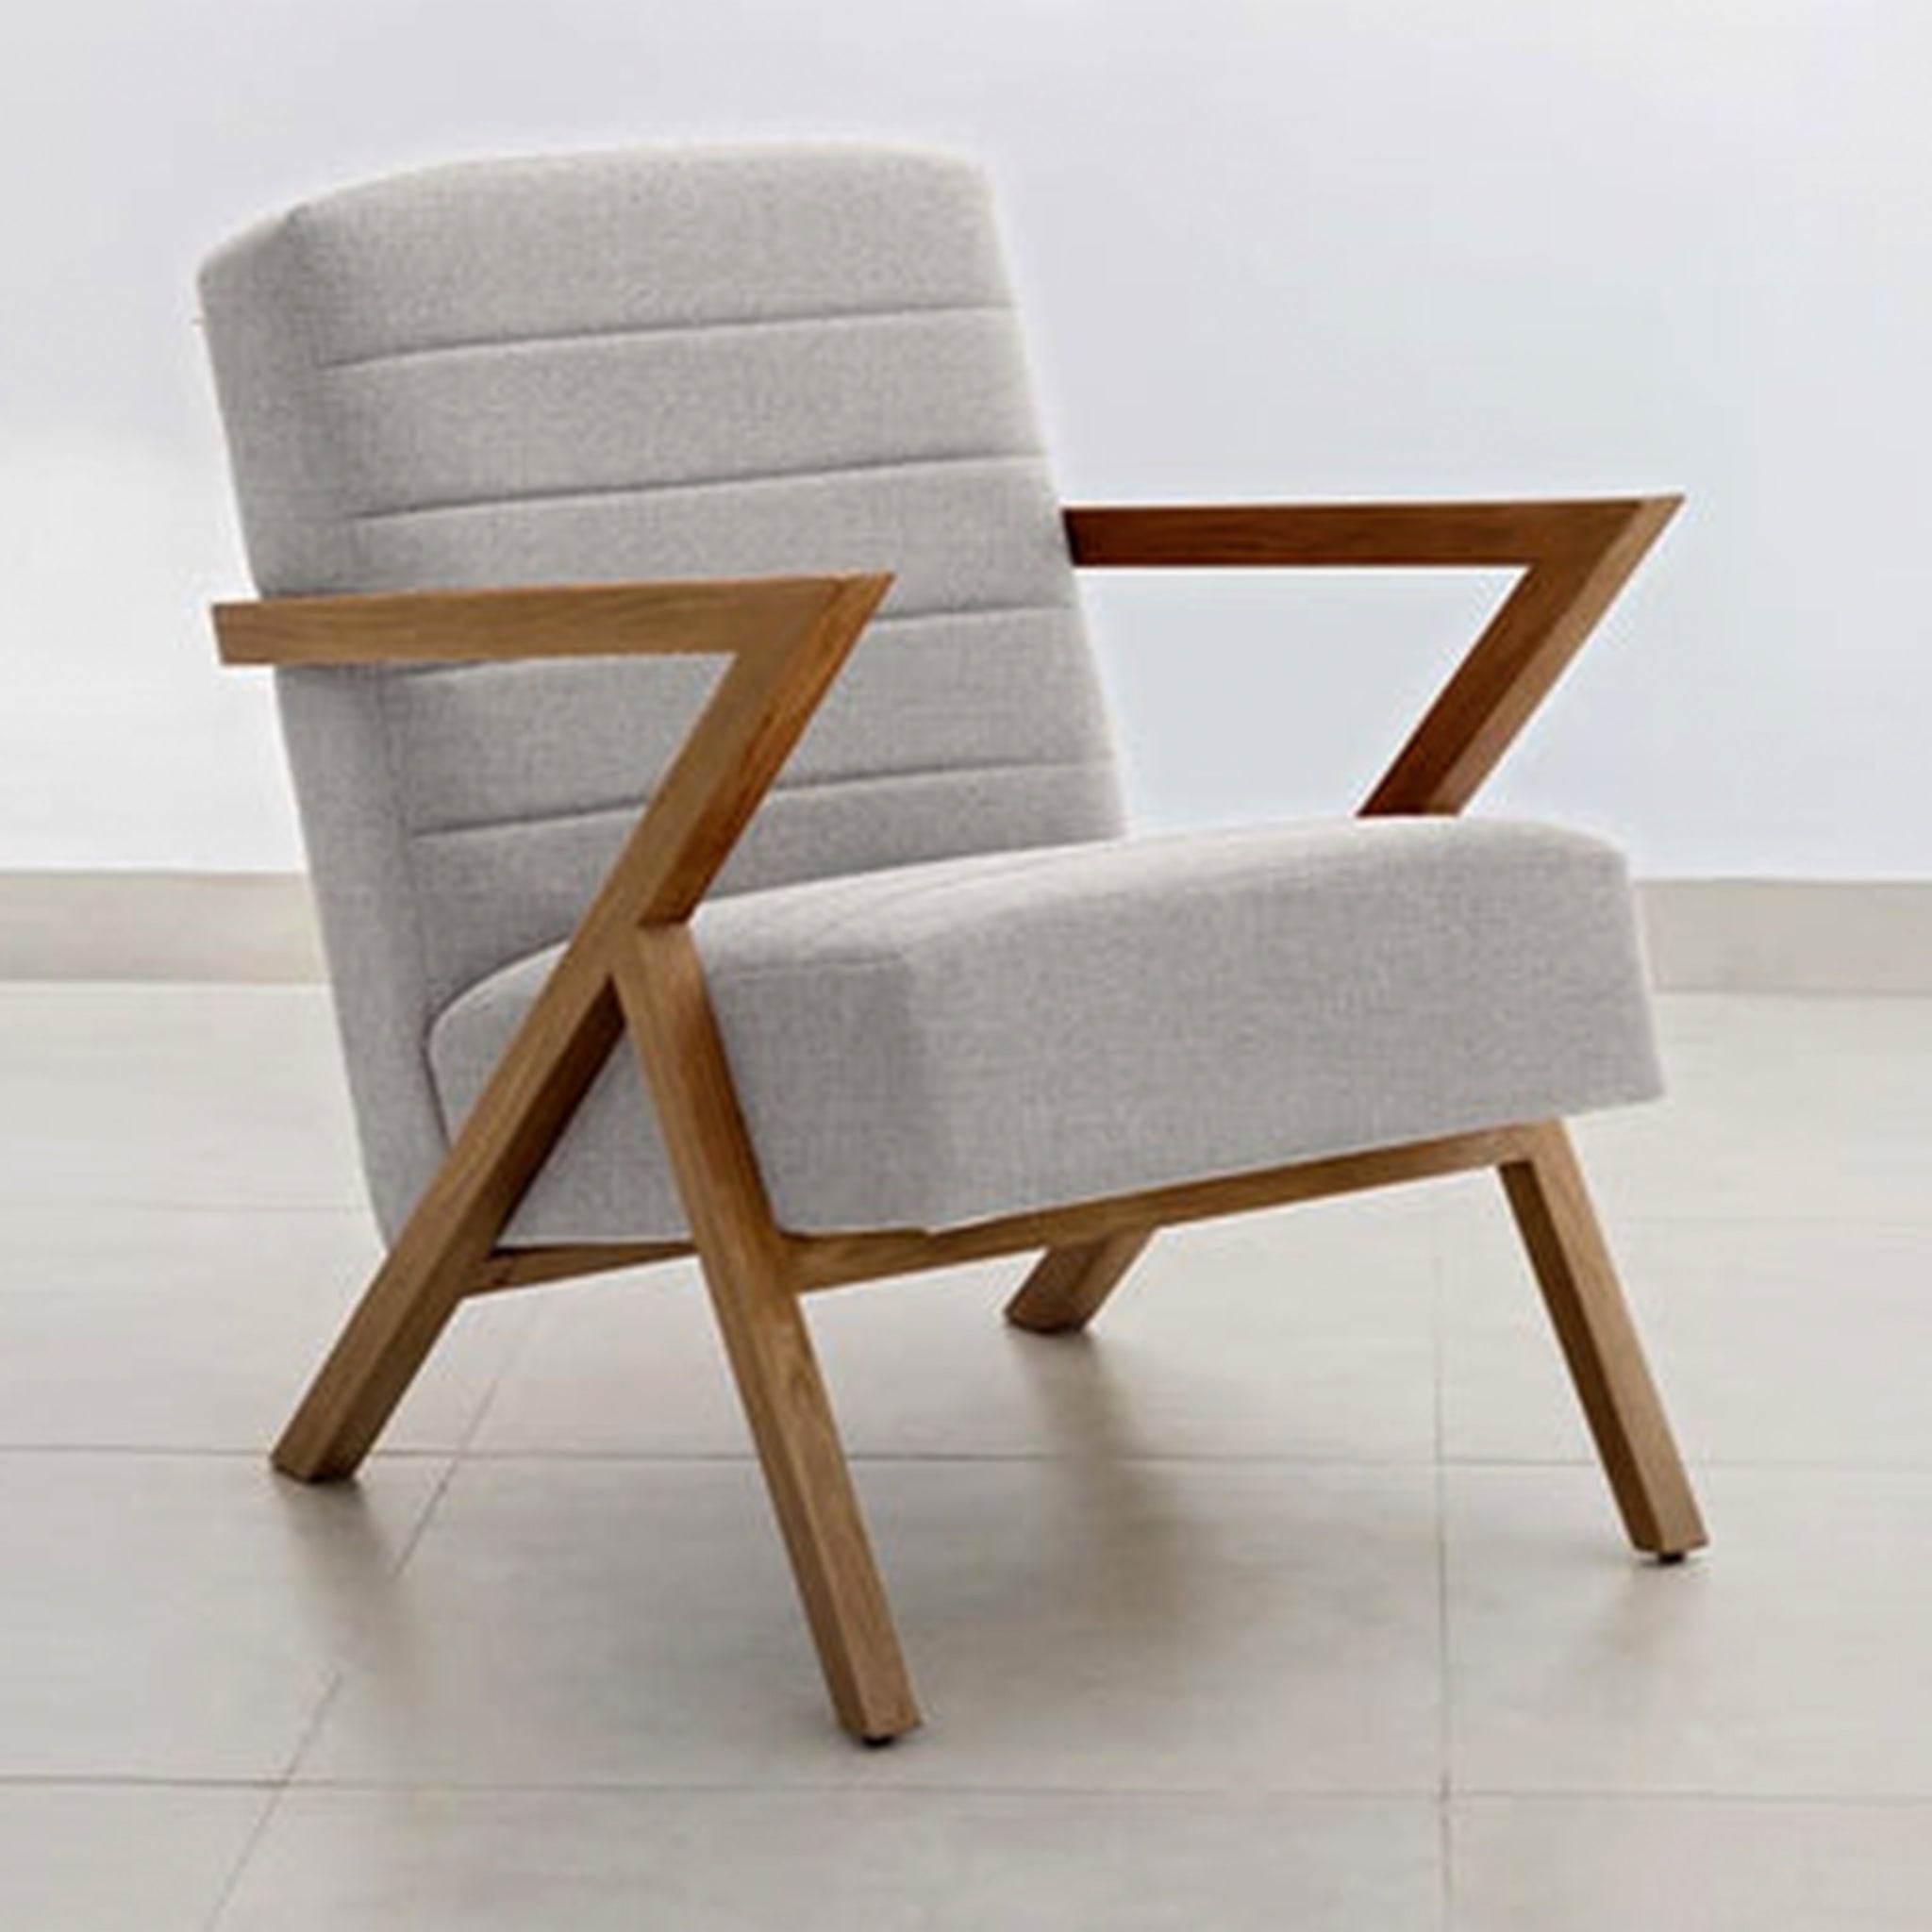 Designer red chair with unique wooden armrests